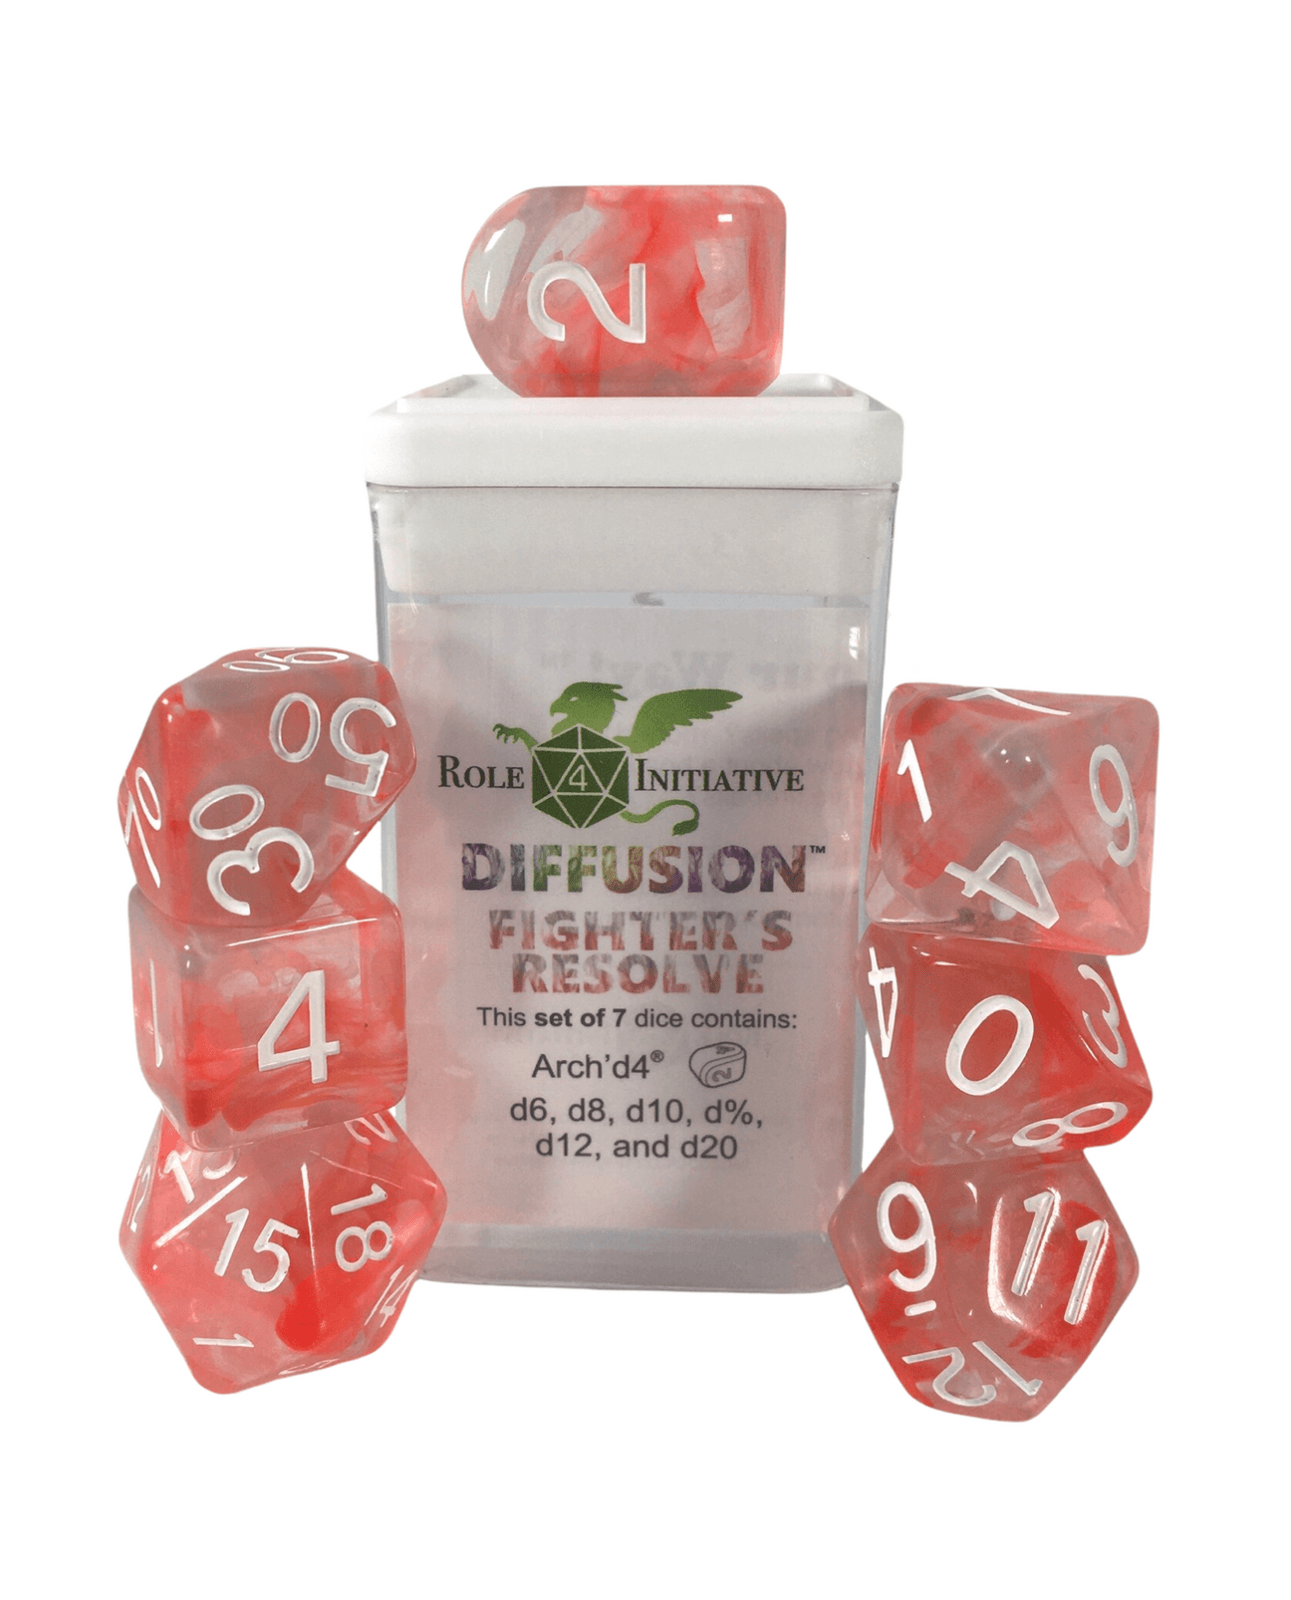 Diffusion Fighter’s Resolve - 7 dice set (with Arch’d4™) - The Fourth Place